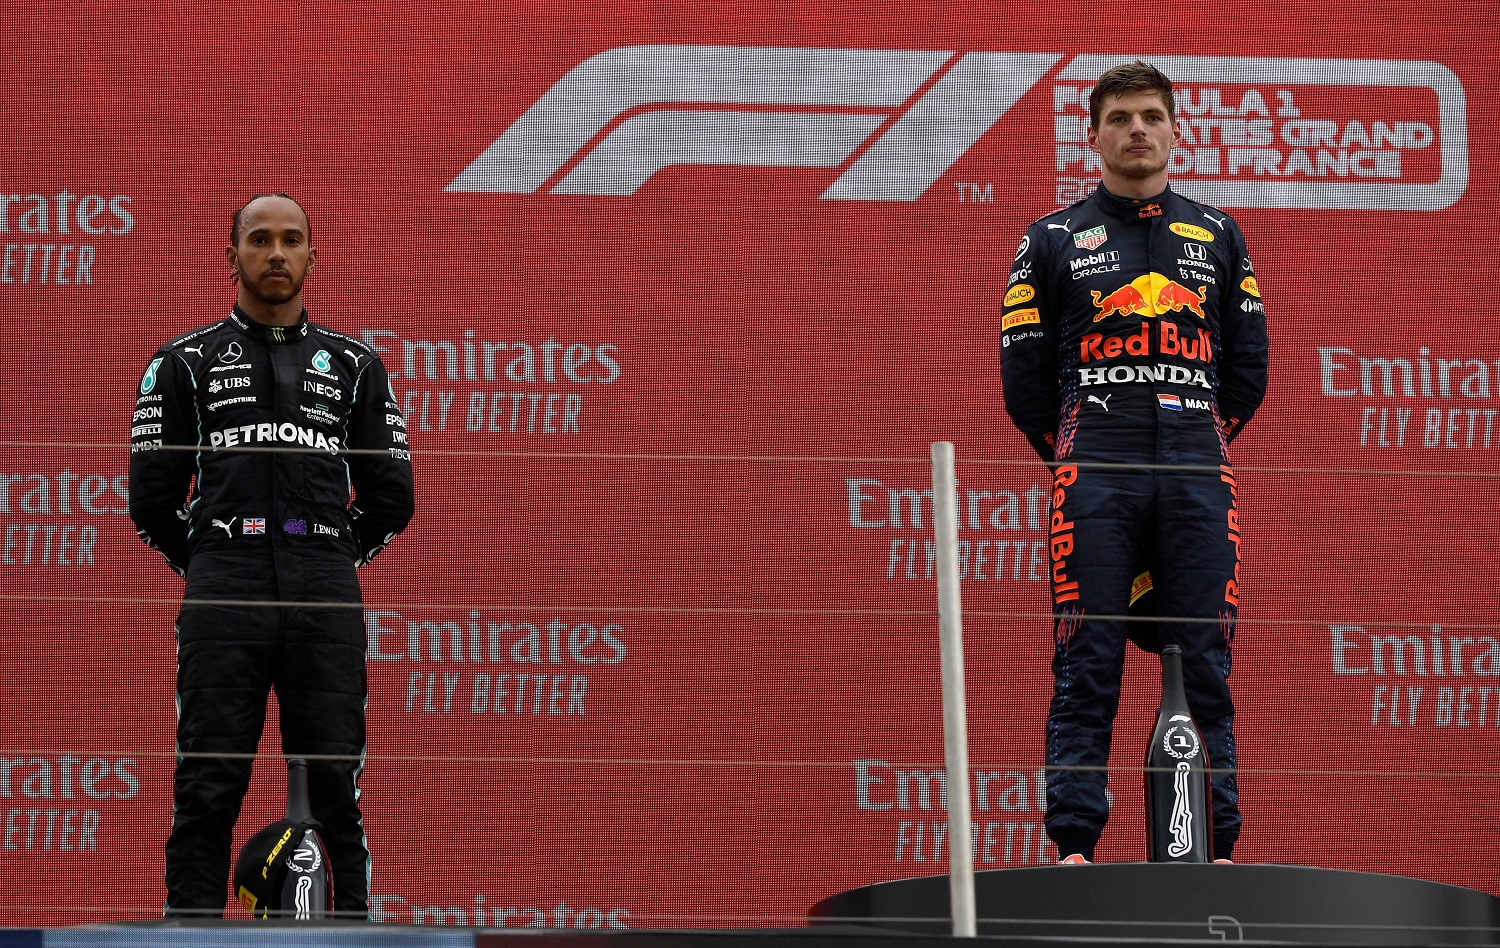 Race winner Max Verstappen, right, and runner-up Lewis Hamilton stand on the podium following the Formula 1 Grand Prix of France at Circuit Paul Ricard on June 20, 2021.